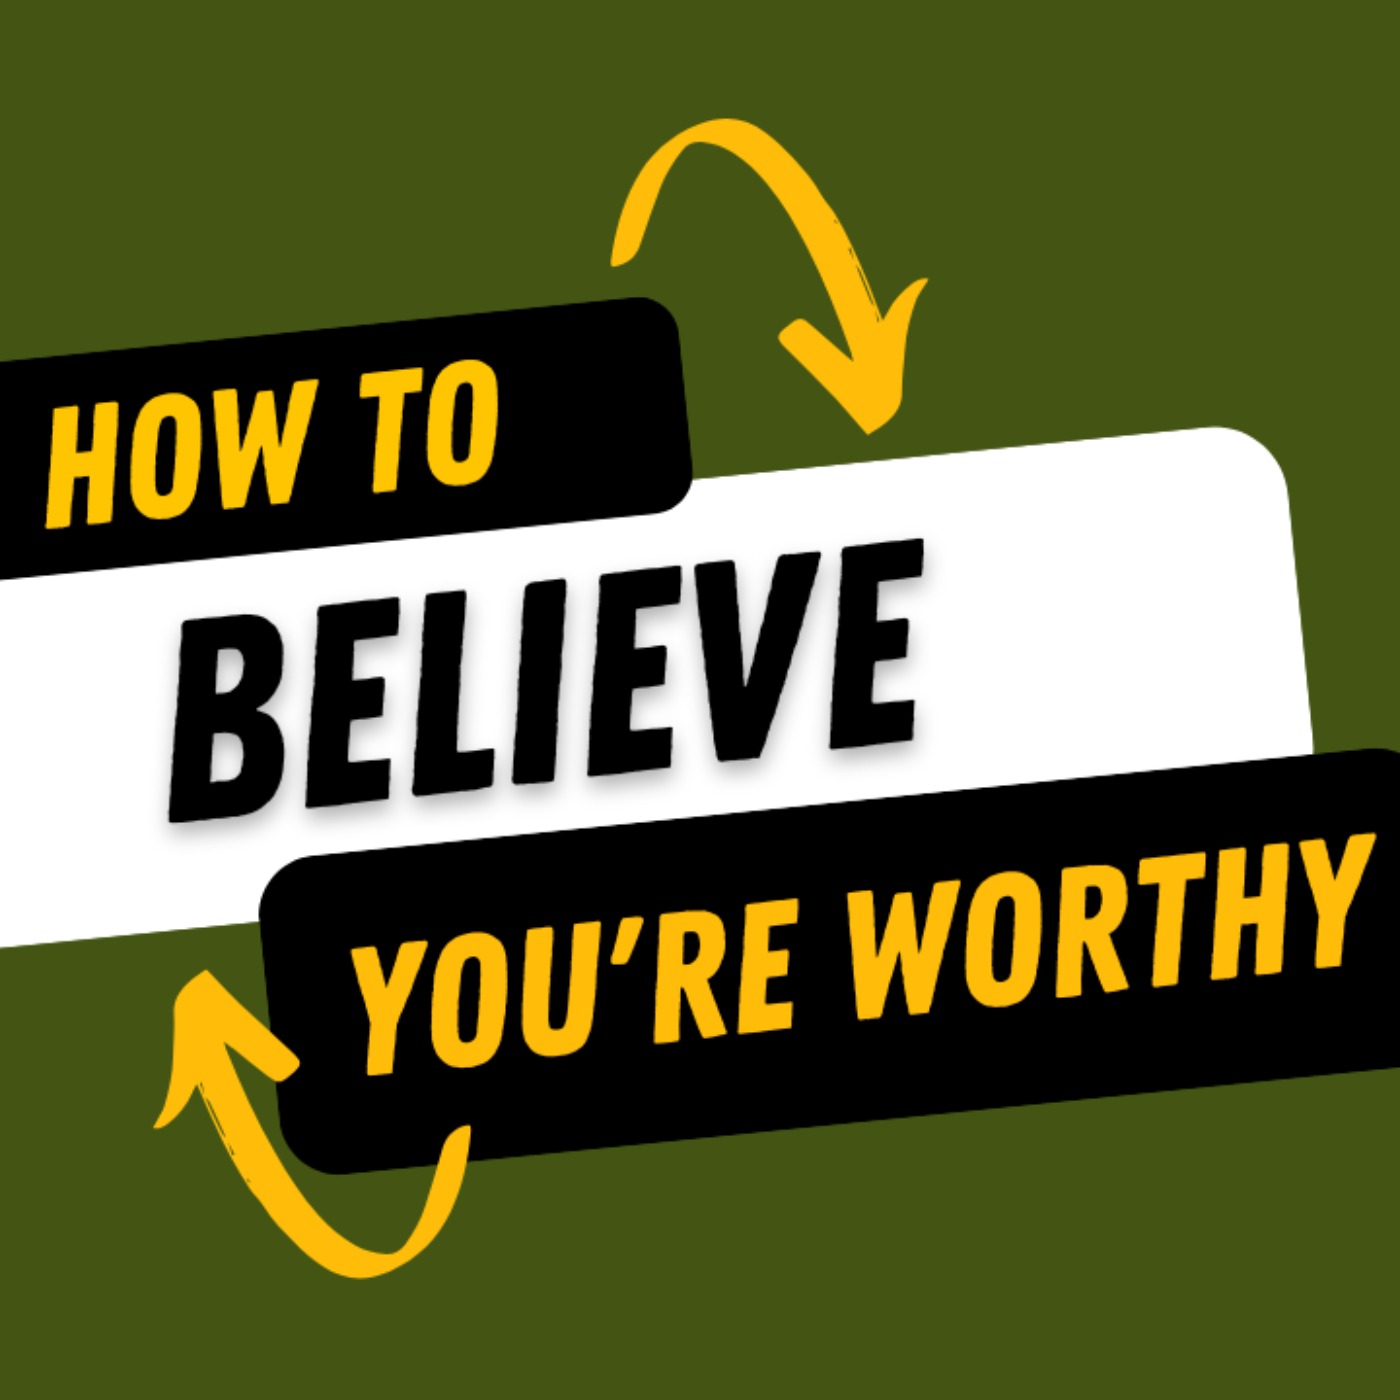 Ep. 344: Violet De Luna on How to Believe You’re a Worthy Writer